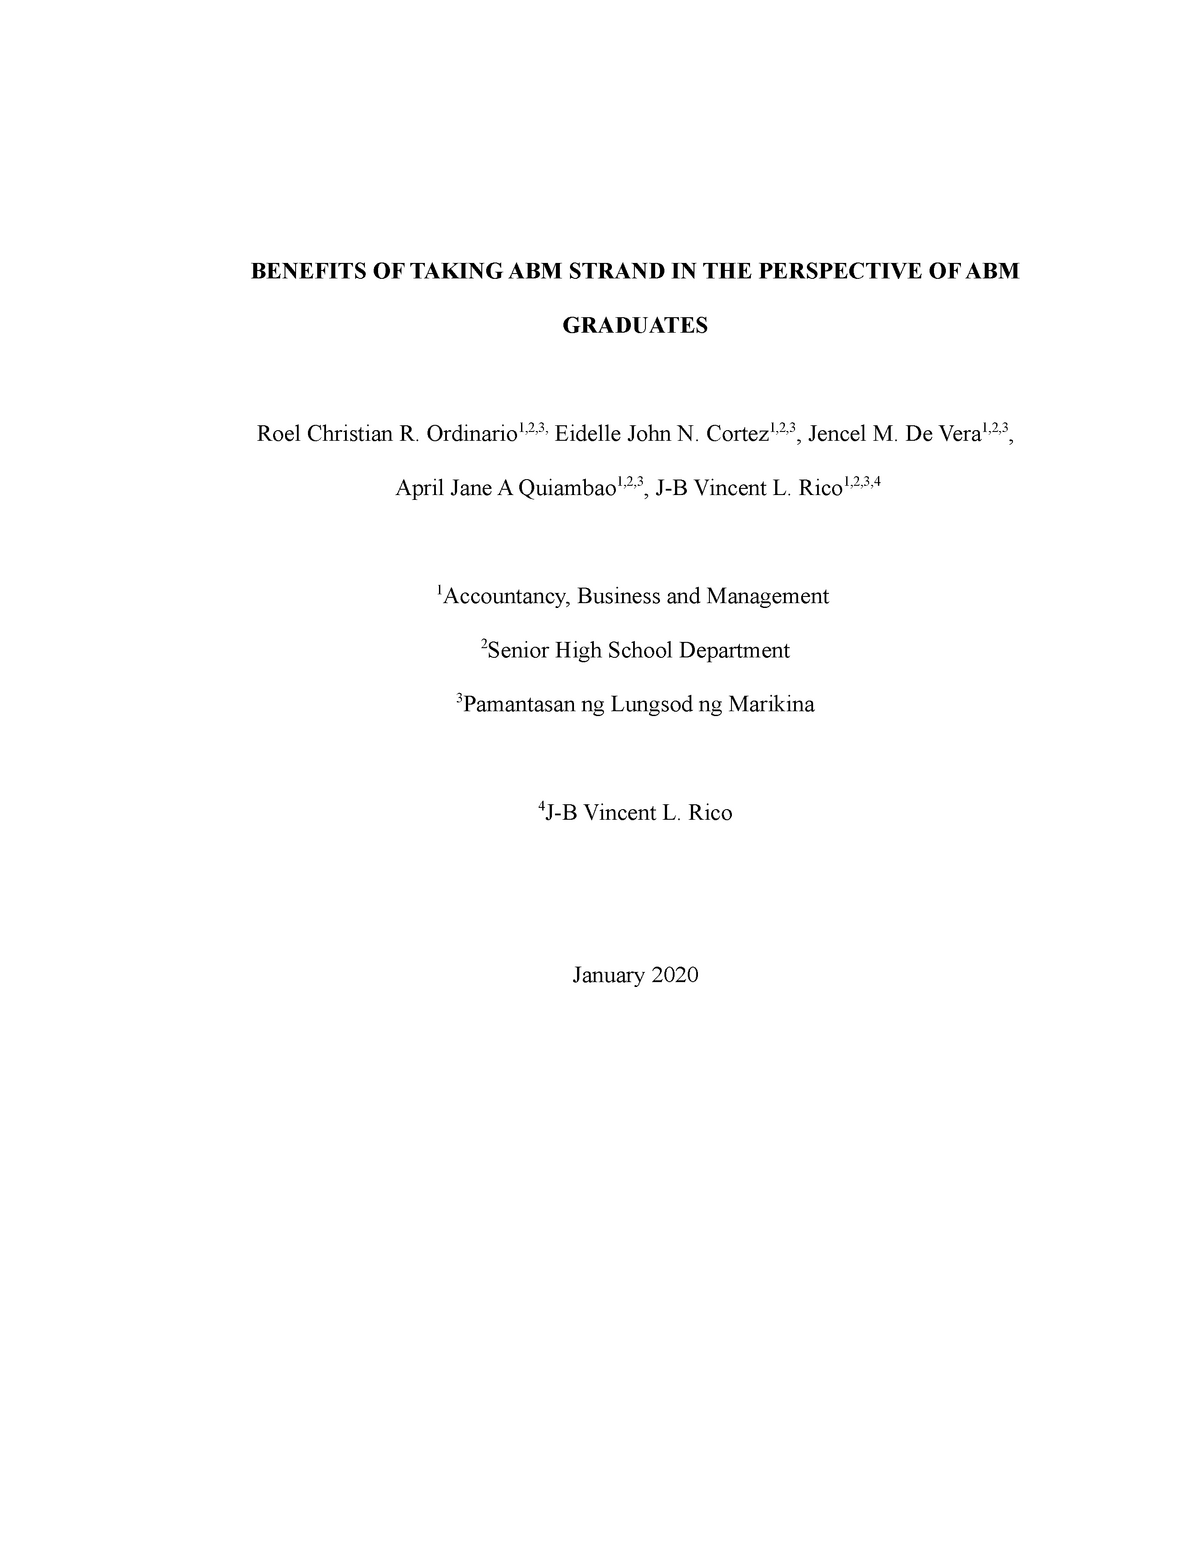 thesis about abm strand quantitative research